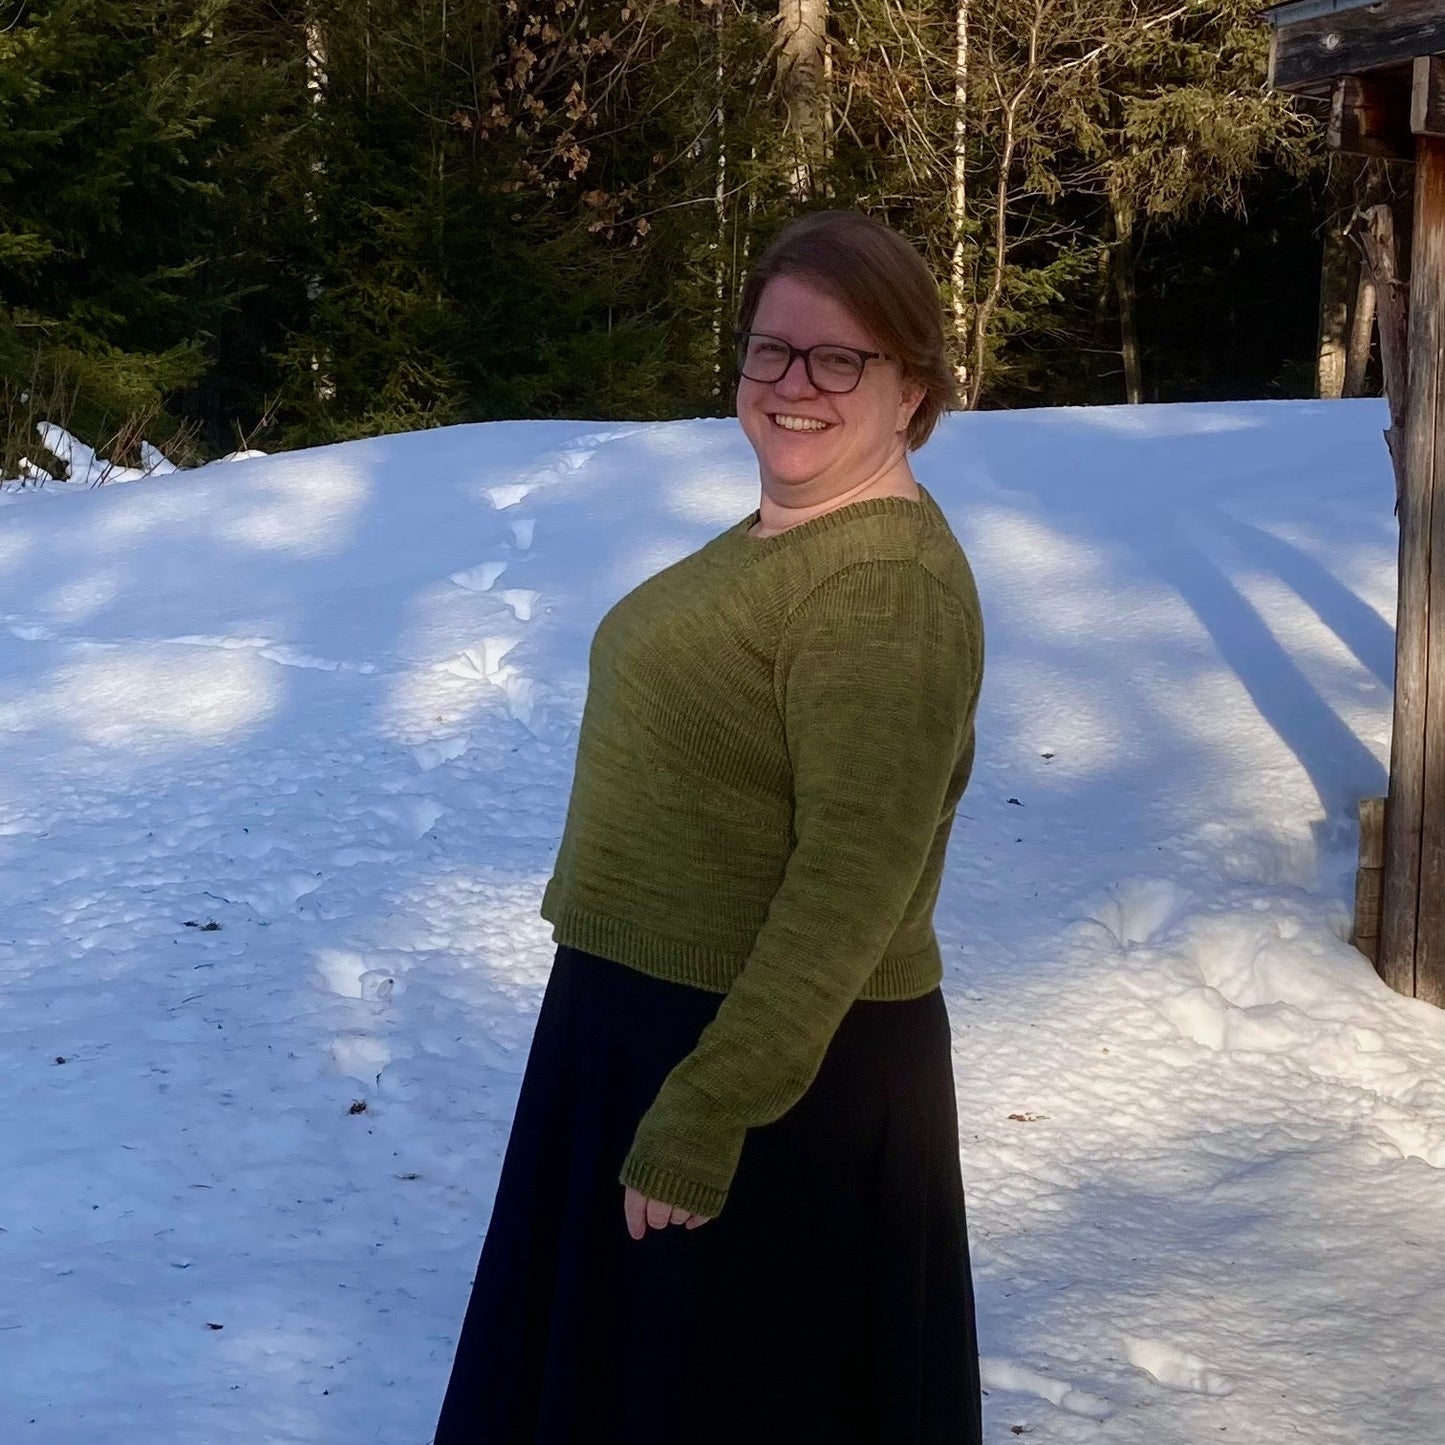 Seen from the side, a person wears a hand knit, green sweater, design with gathered sleeves, with a black skirt. They smile at the camera.